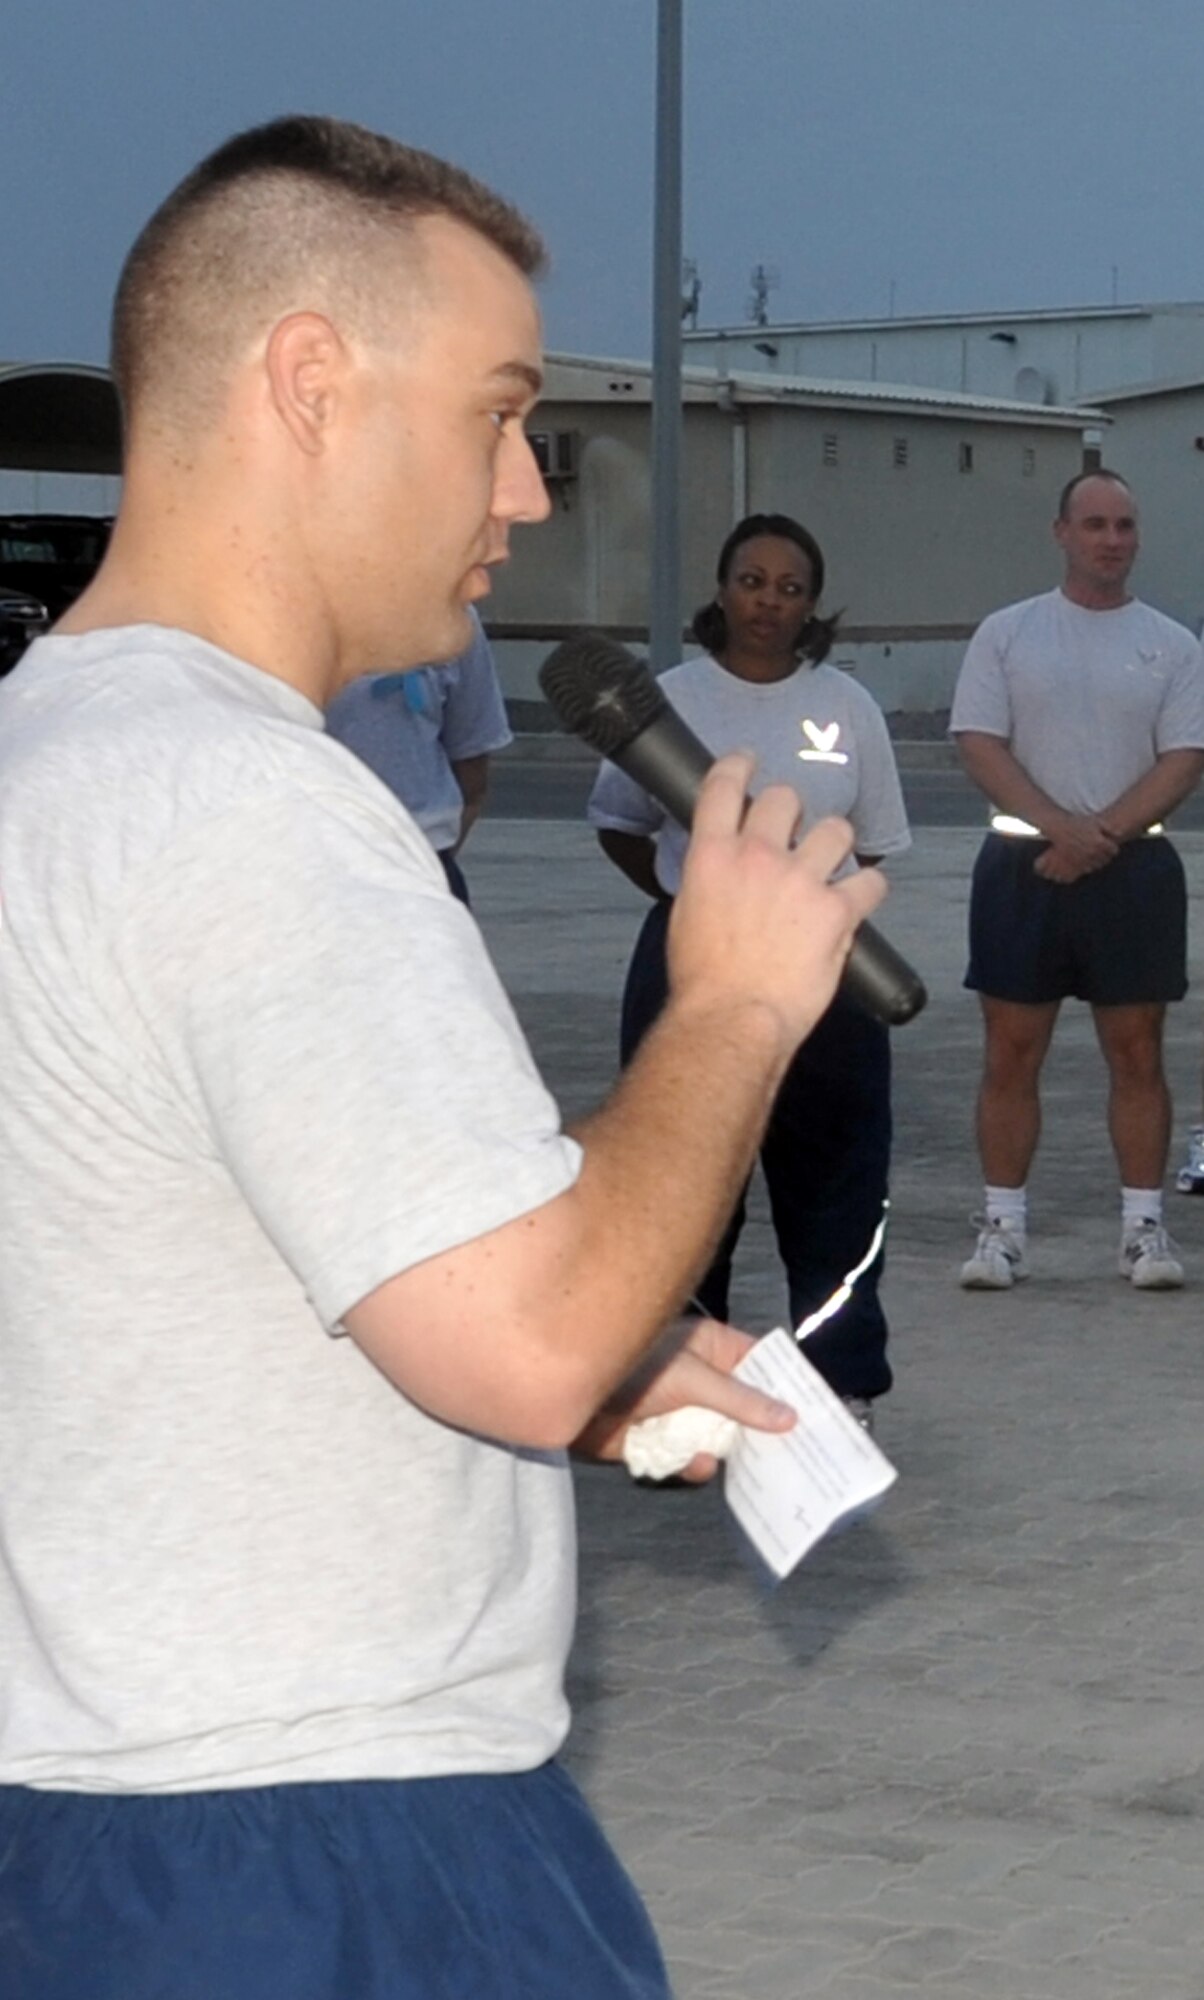 Capt. Richard Laca, 380th Air Expeditionary Wing sexual assault response coordinator, talks to the attendees to the "Walk A Mile In Their Shoes" event put on by the 380th Air Expeditionary Wing in observance of Sexual Assault Awareness Month at a non-disclosed base in Southwest Asia on April 19, 2010. Captain Laca is deployed from Eielson Air Force Base, Alaska. (U.S. Air Force Photo/Master Sgt. Scott T. Sturkol/Released)